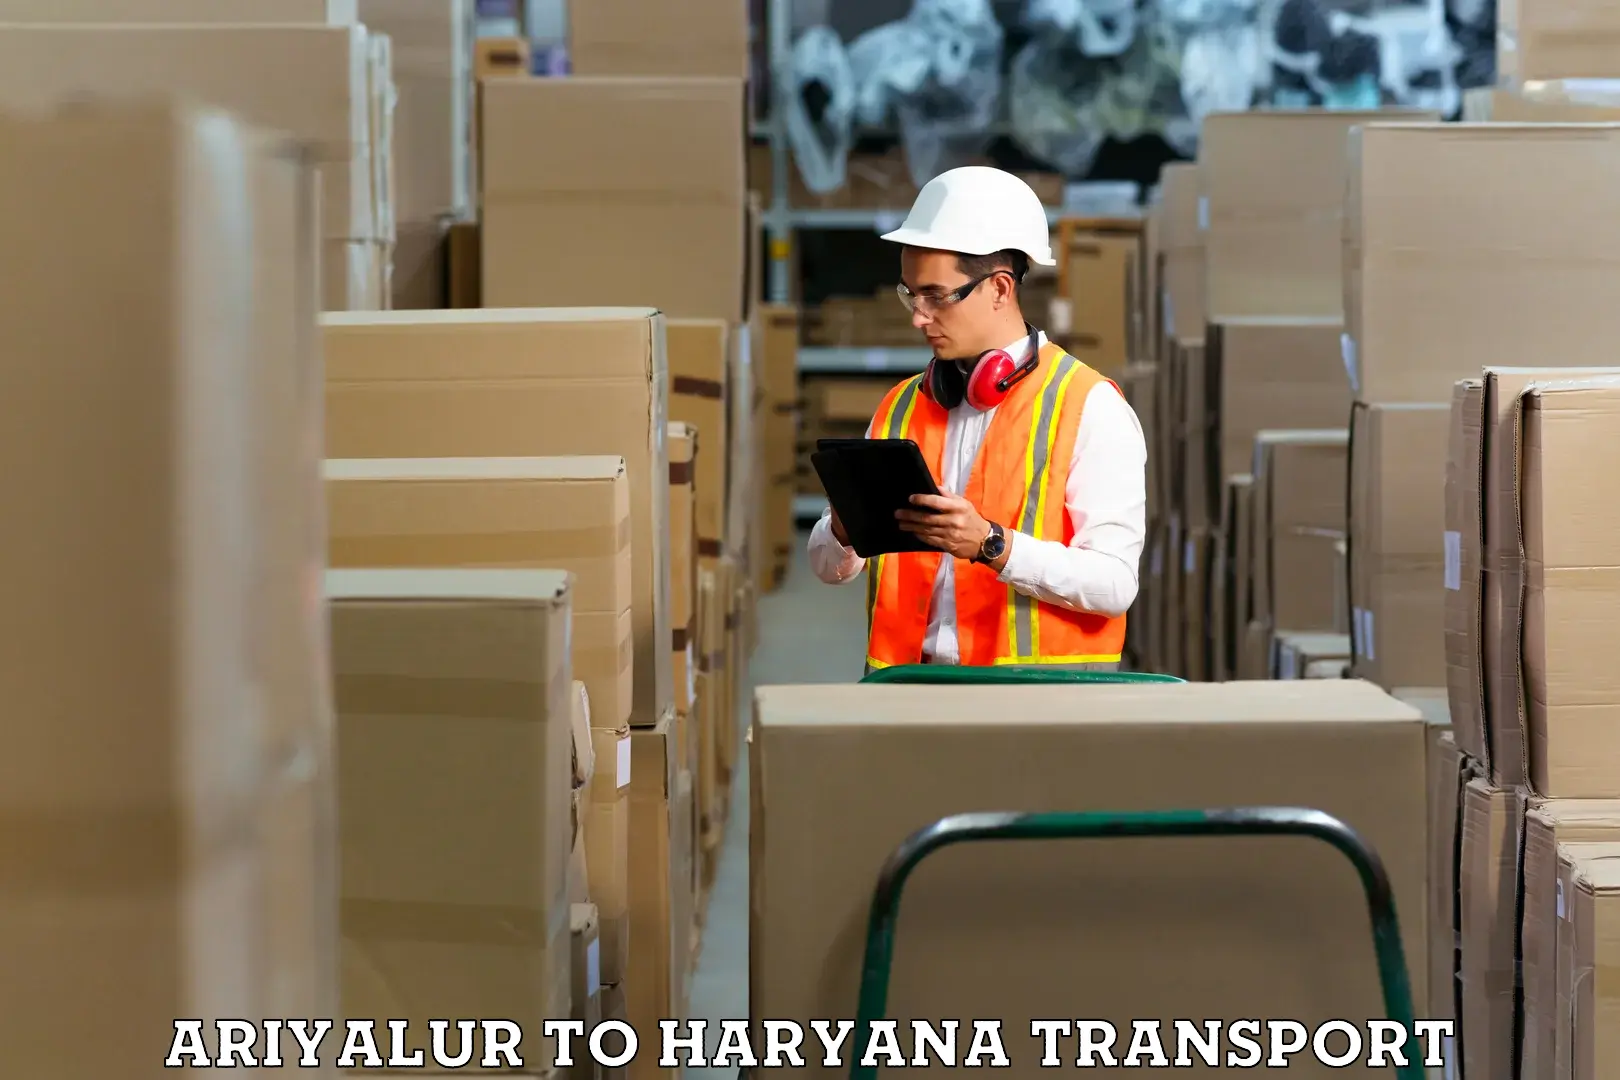 Goods delivery service Ariyalur to NCR Haryana